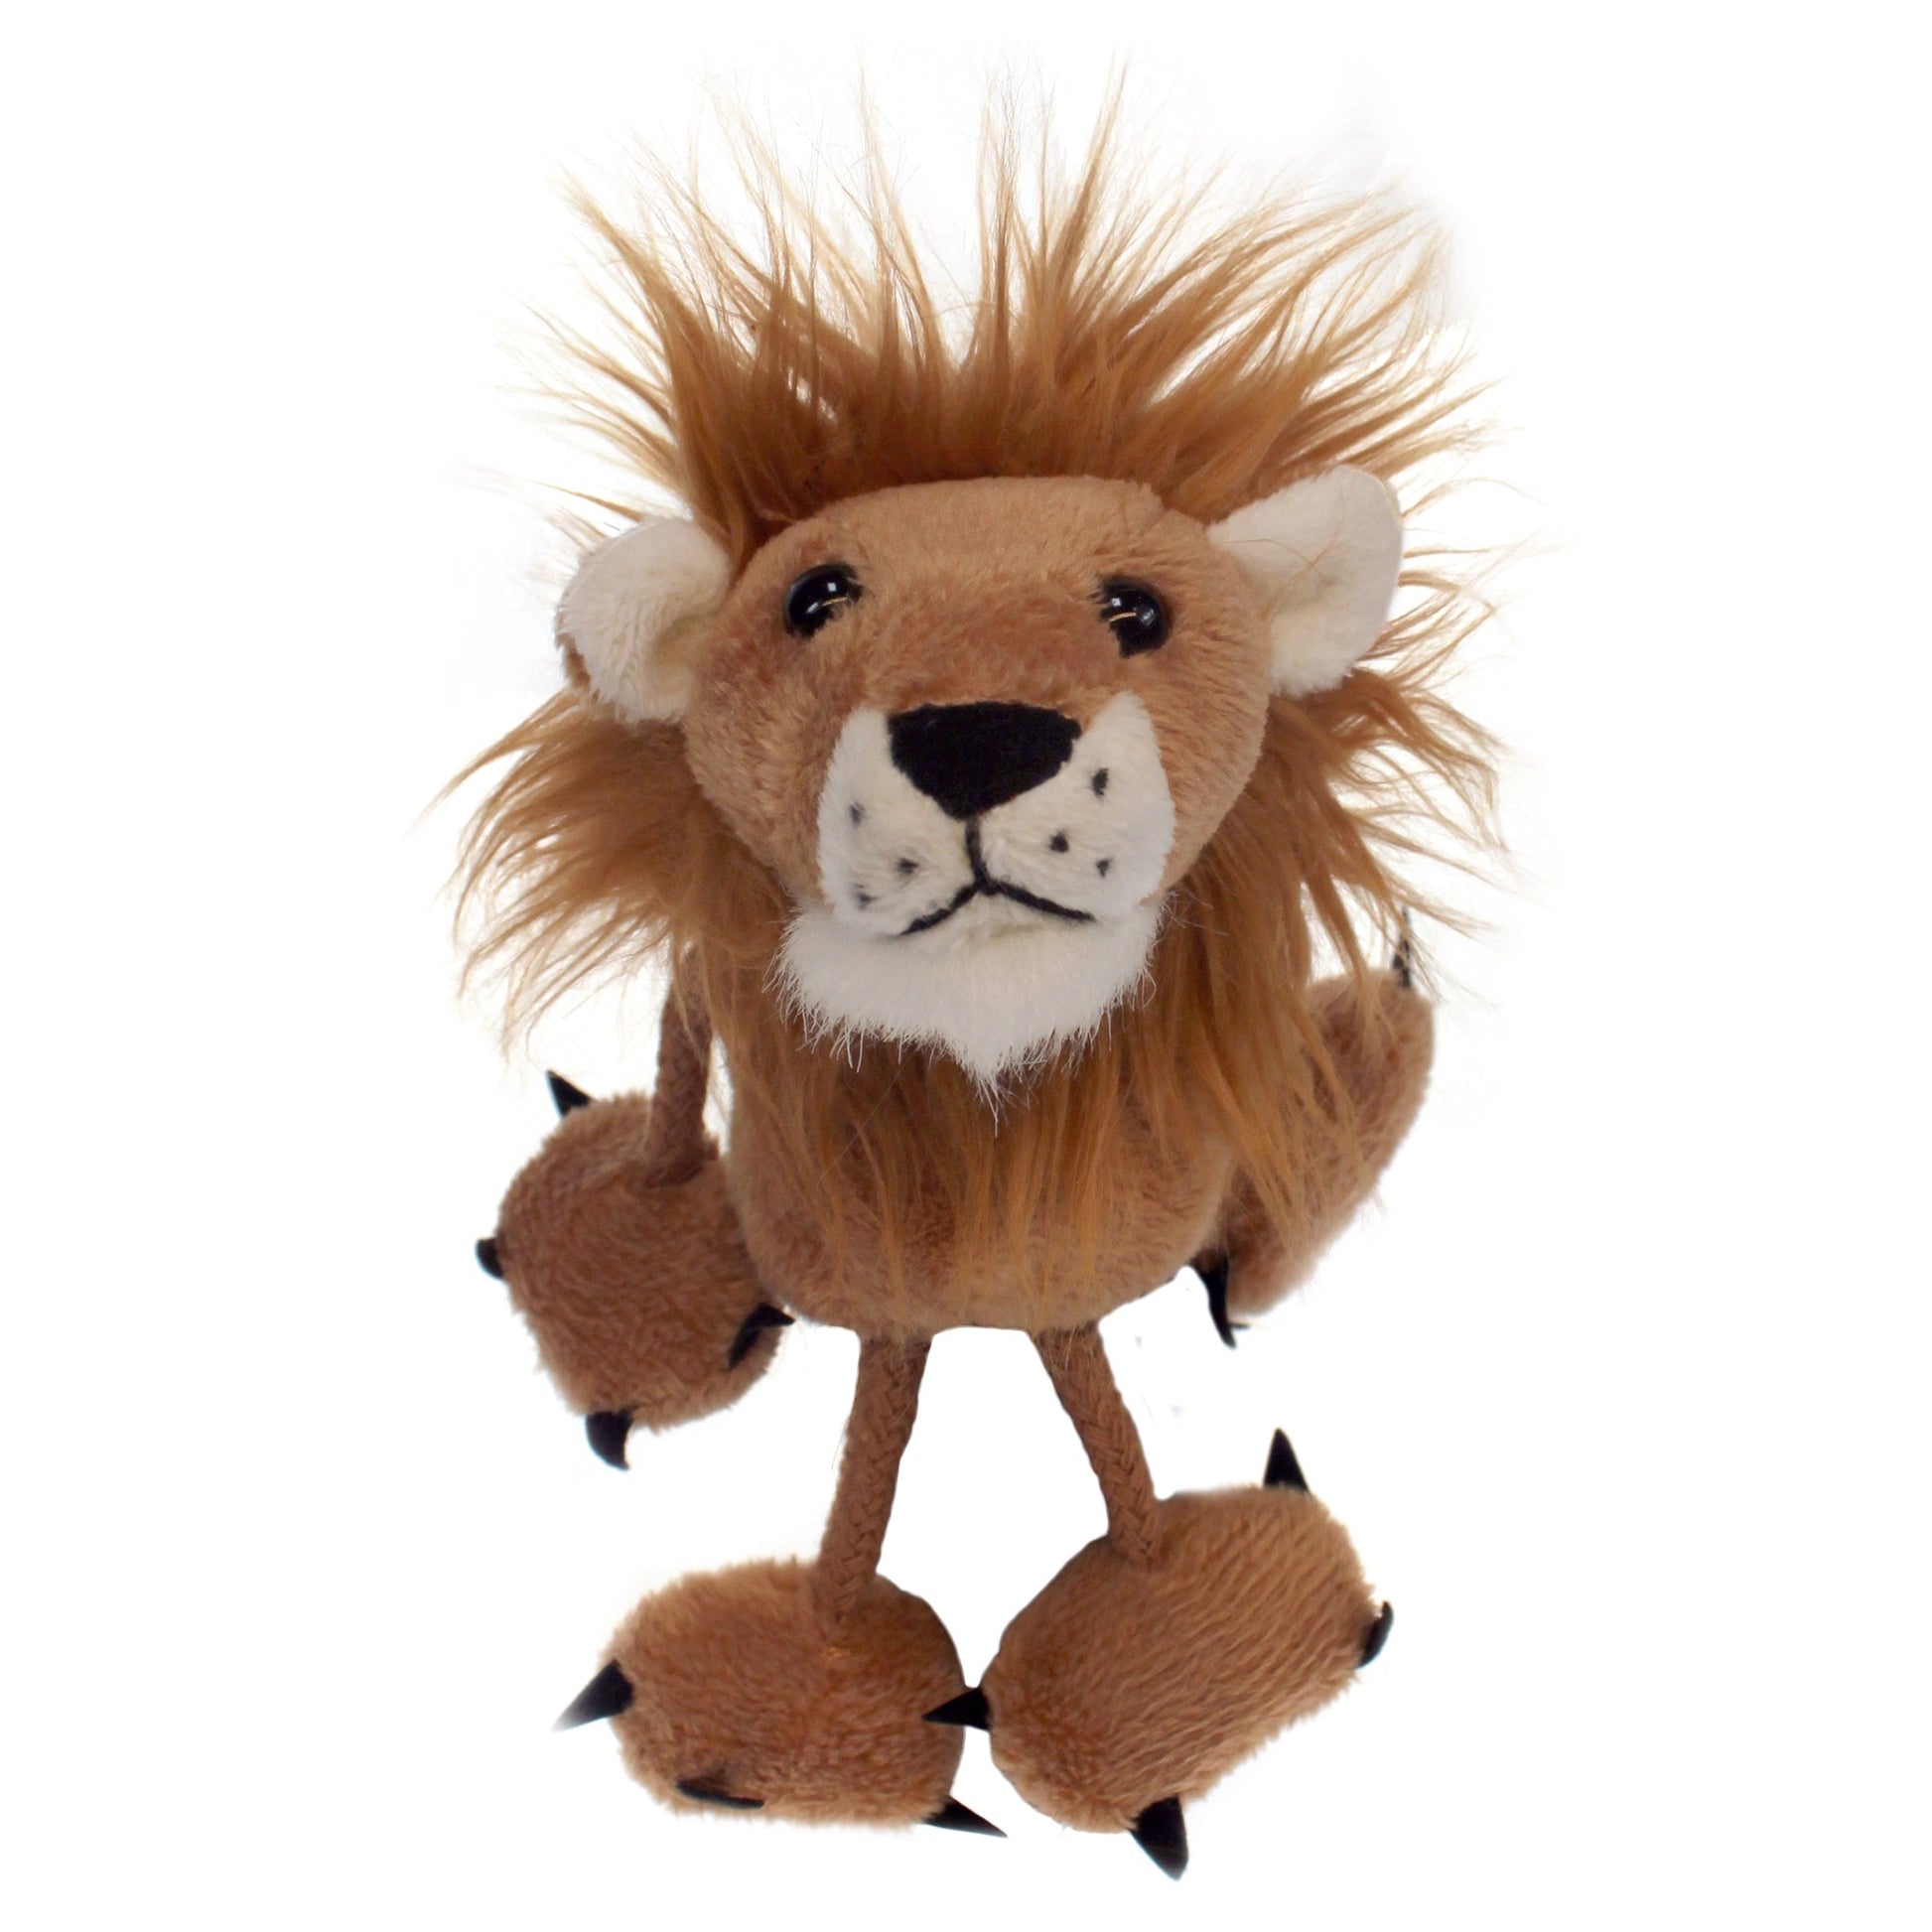 Lion Finger Puppet - The Puppet Company - The Forgotten Toy Shop